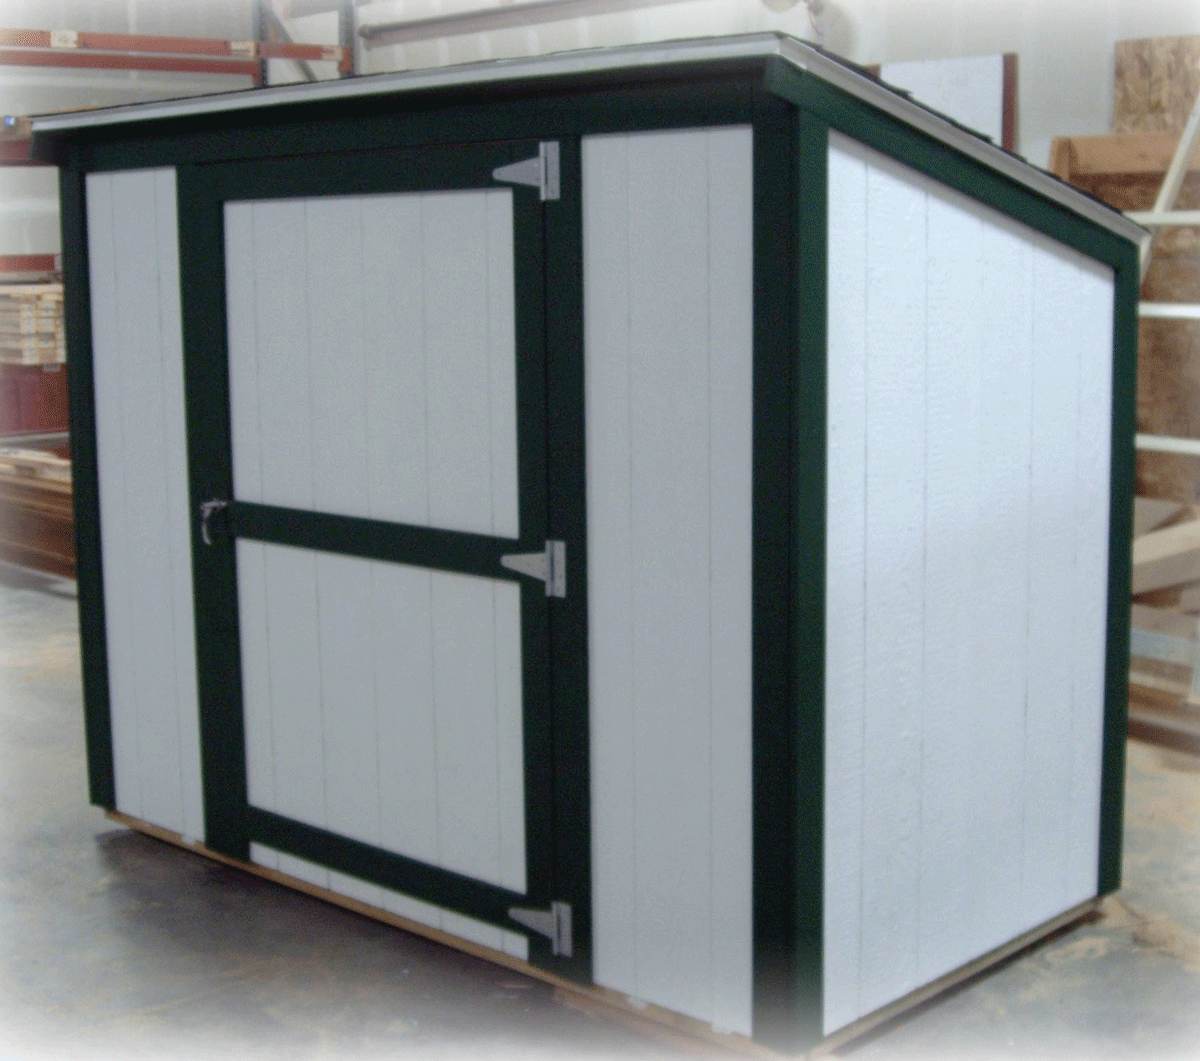  A 4 foot by 8 foot Yard hutch shed 